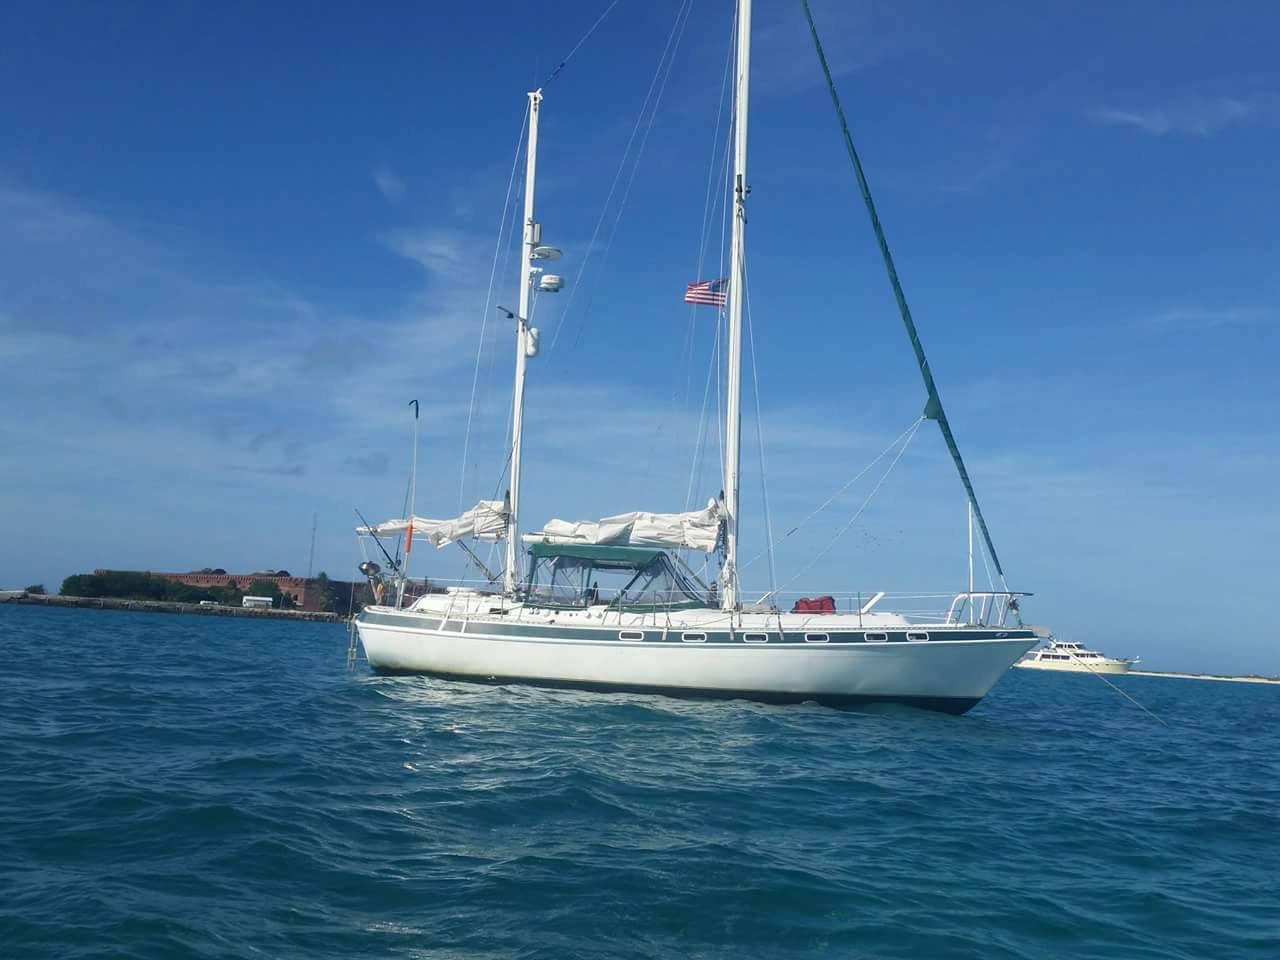 1979 Morgan 415 Out Island Ketch Sailboat for sale in St Petersburg, FL - image 15 